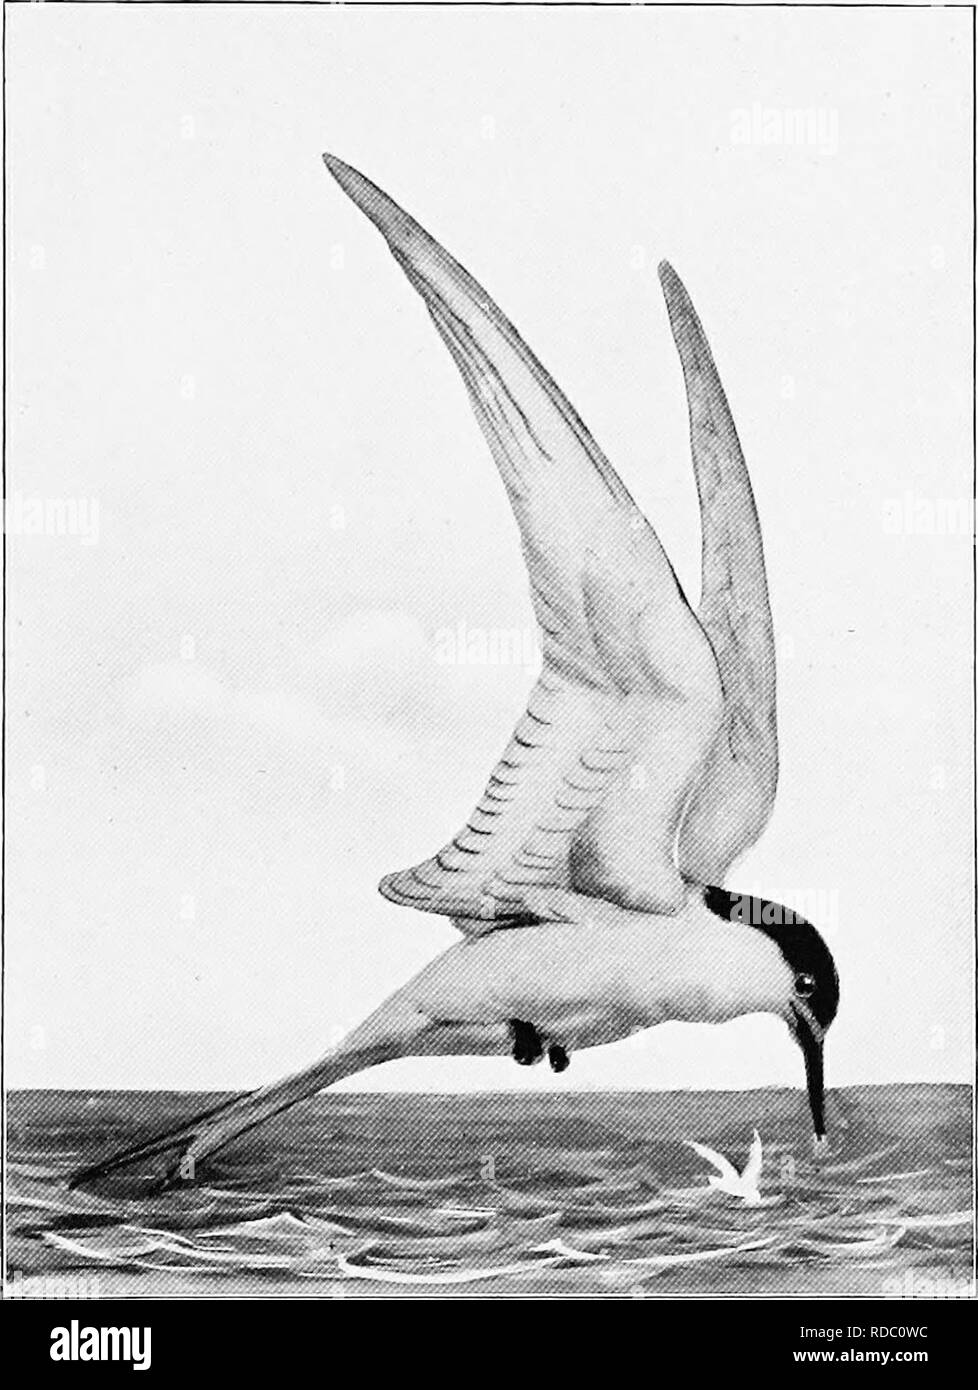 . The birds of Australia. Birds. THE WHITE-FKONTED TEEN 77 The White-fronted Tern. Sterna frontalis. New Zealand and Australian coasts. White at base of bill, crown and nape black, the feathers filamentous; upper surface pale grey; outer web of first primary black, other primaries edged with white to the tips of the inner webs; uuderparts white, sometimes with pink tinge; bill black. Total length 16 to 17 inches, according to development of tail-streamers, culmen 2.2, wing 11.25, tail 7, depth of fork 4, tarsus 0.85. In moulting plumage the crown and forehead are mottled with white.. Toy. &quo Stock Photo